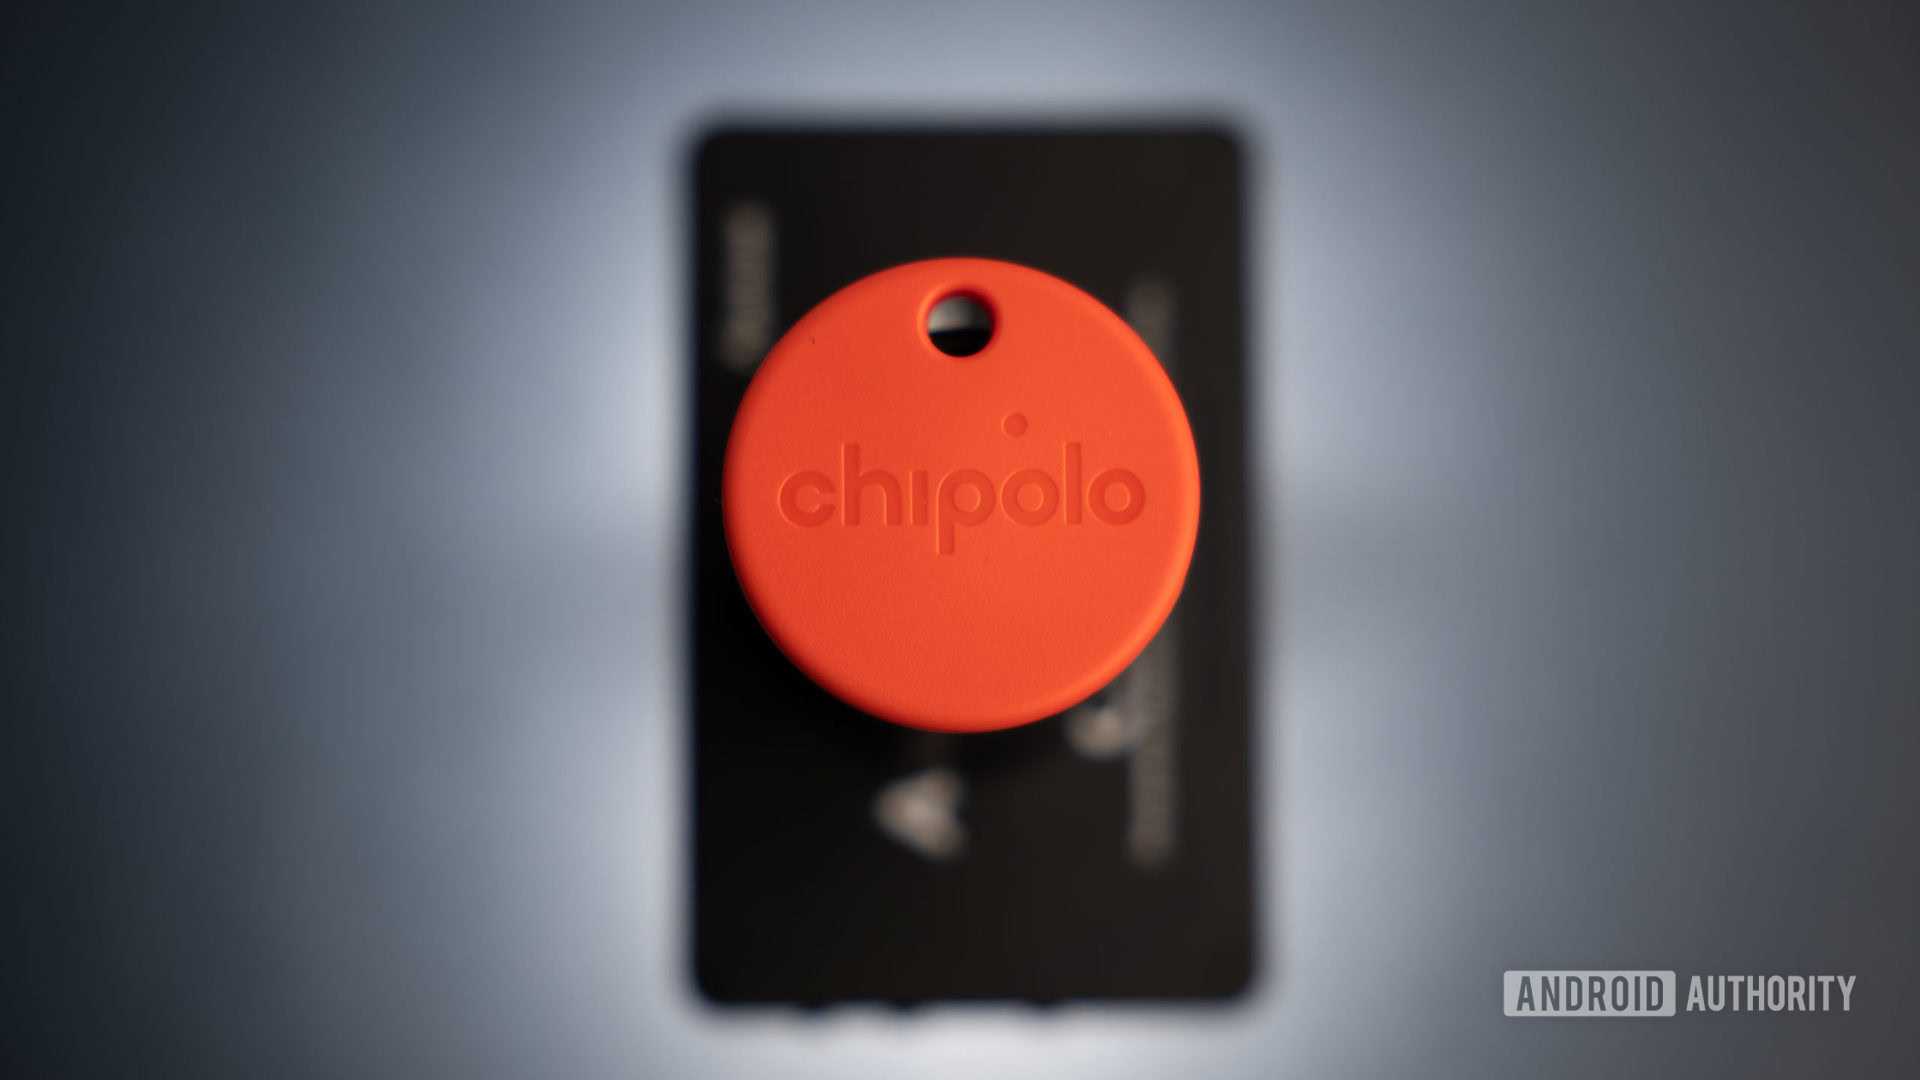 Chipolo One review: Free features and flashy colors for everyone